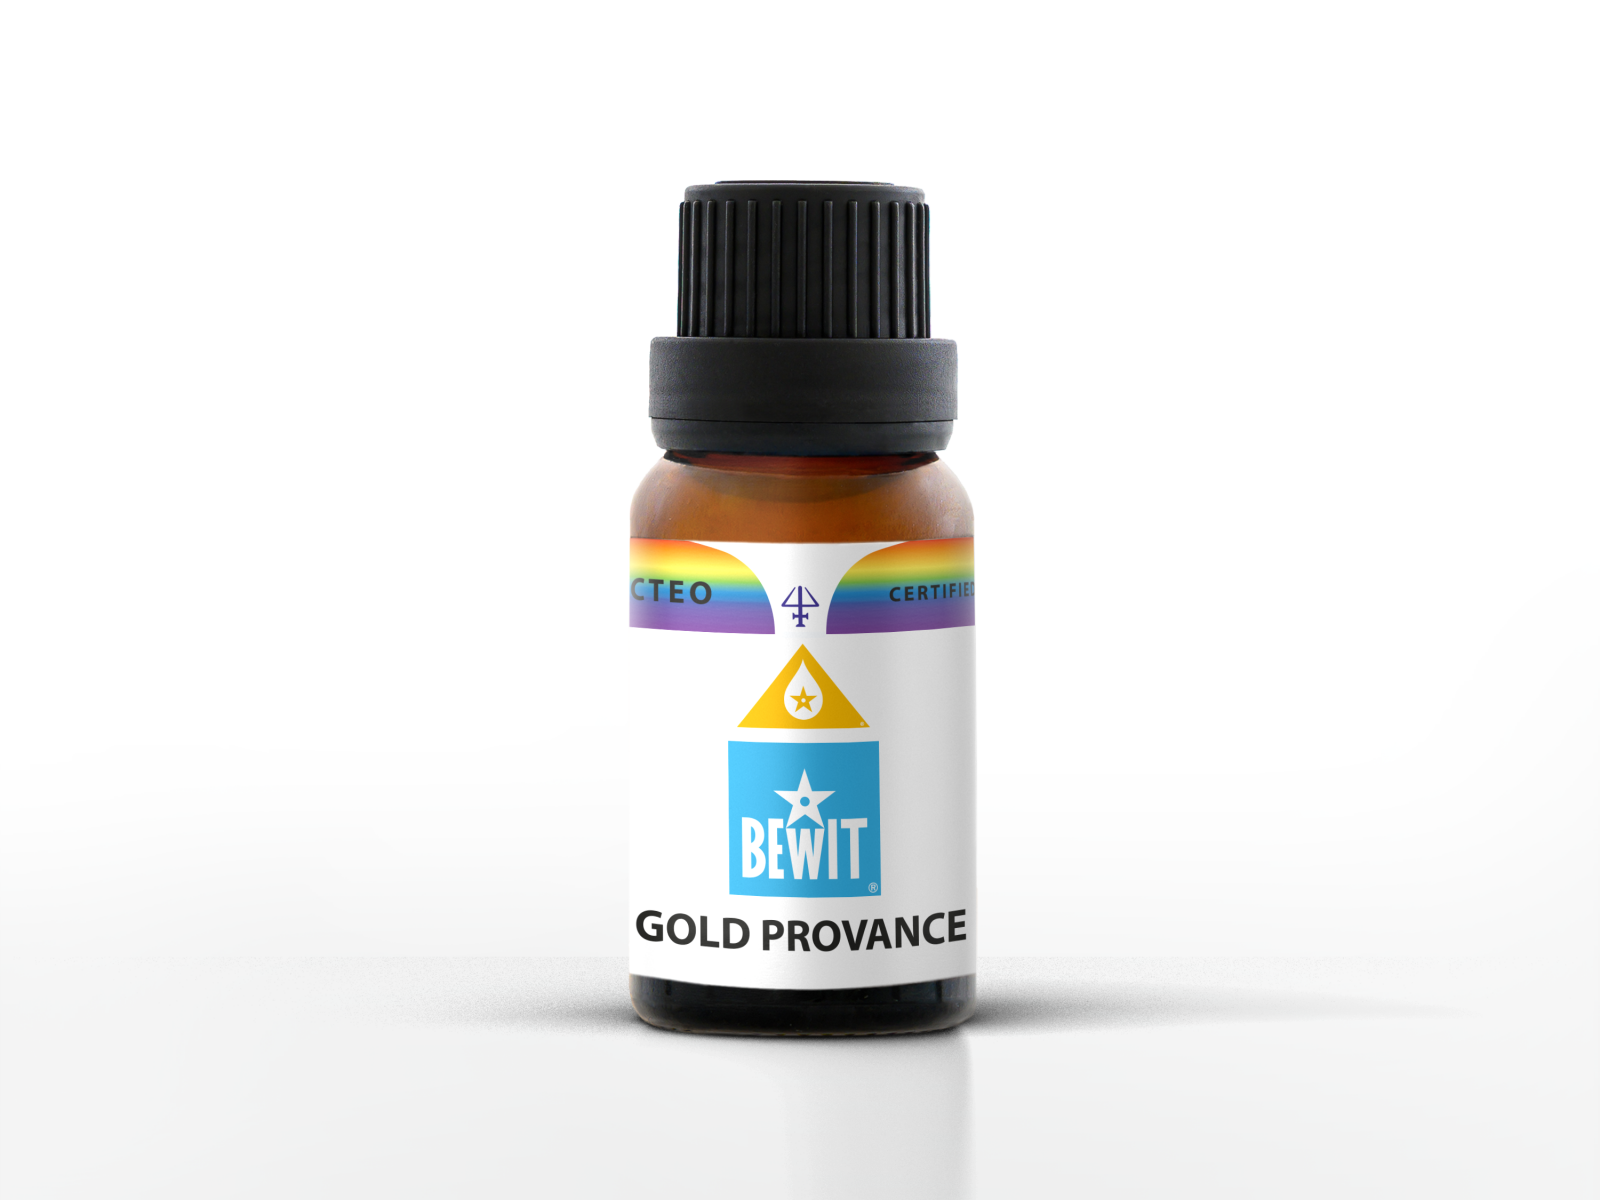 BEWIT GOLD PROVANCE - Blend of essential oils - 1